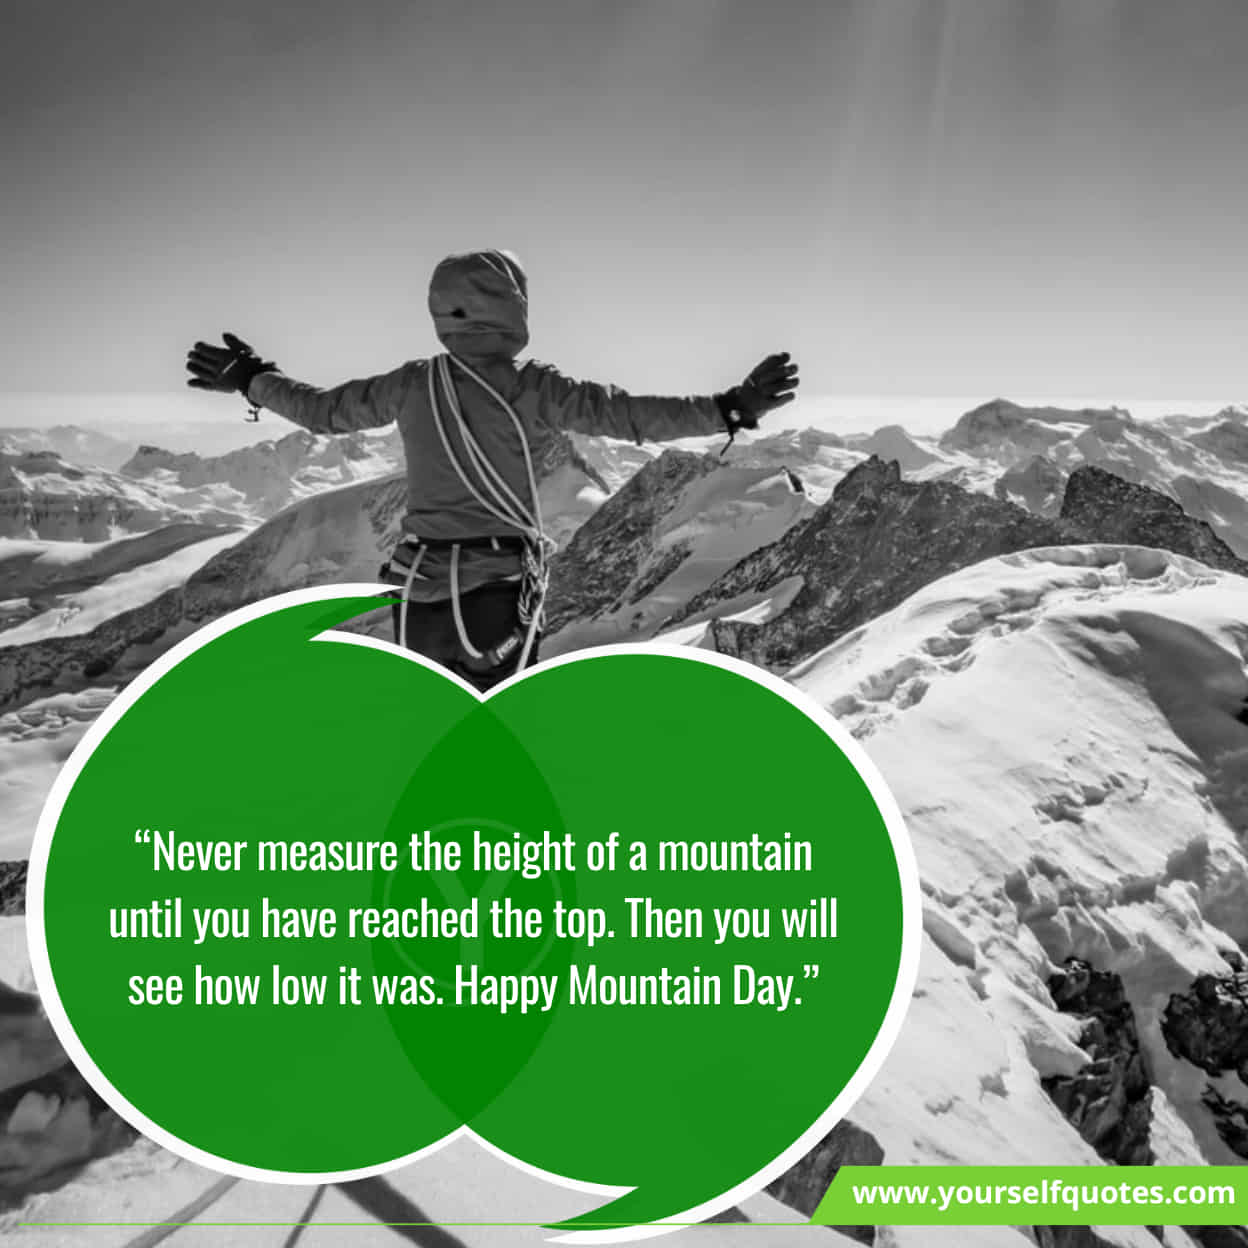 International Mountain Day Quotes, Wishes